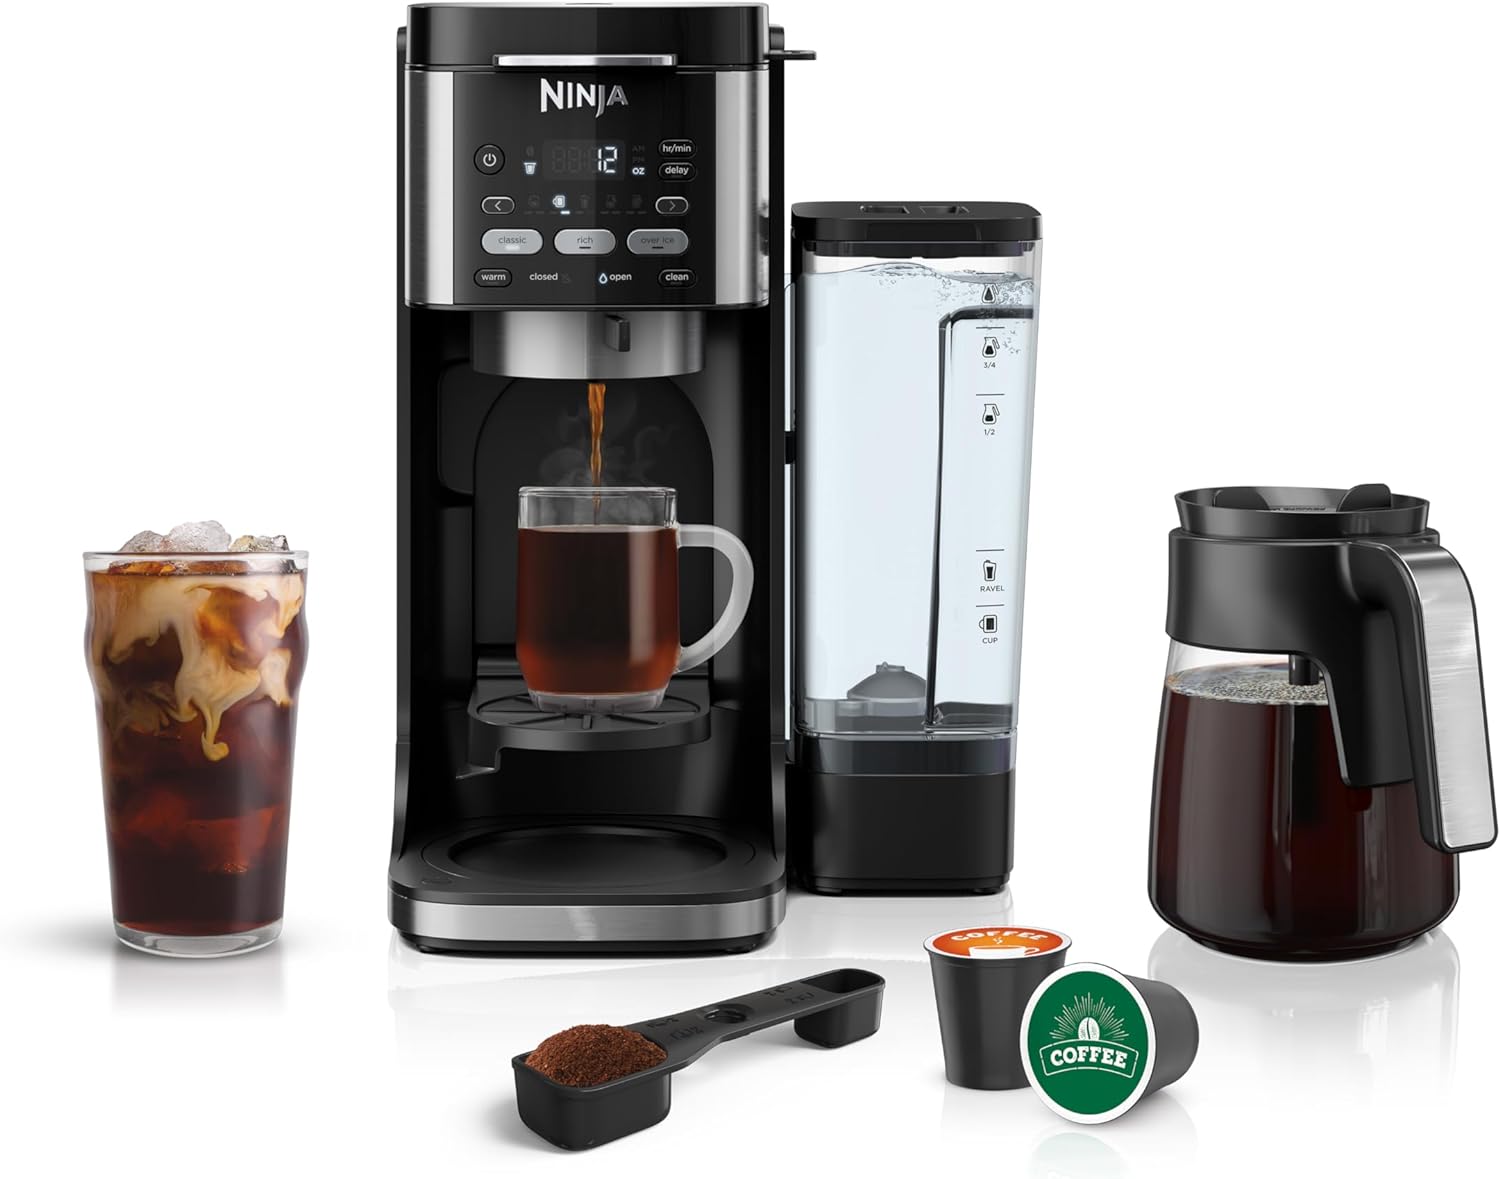 Dual Brew Coffee Maker - Ice Coffee - Hot Coffee - Compatible with K-Cups and 12-Cup Drip Coffee Maker